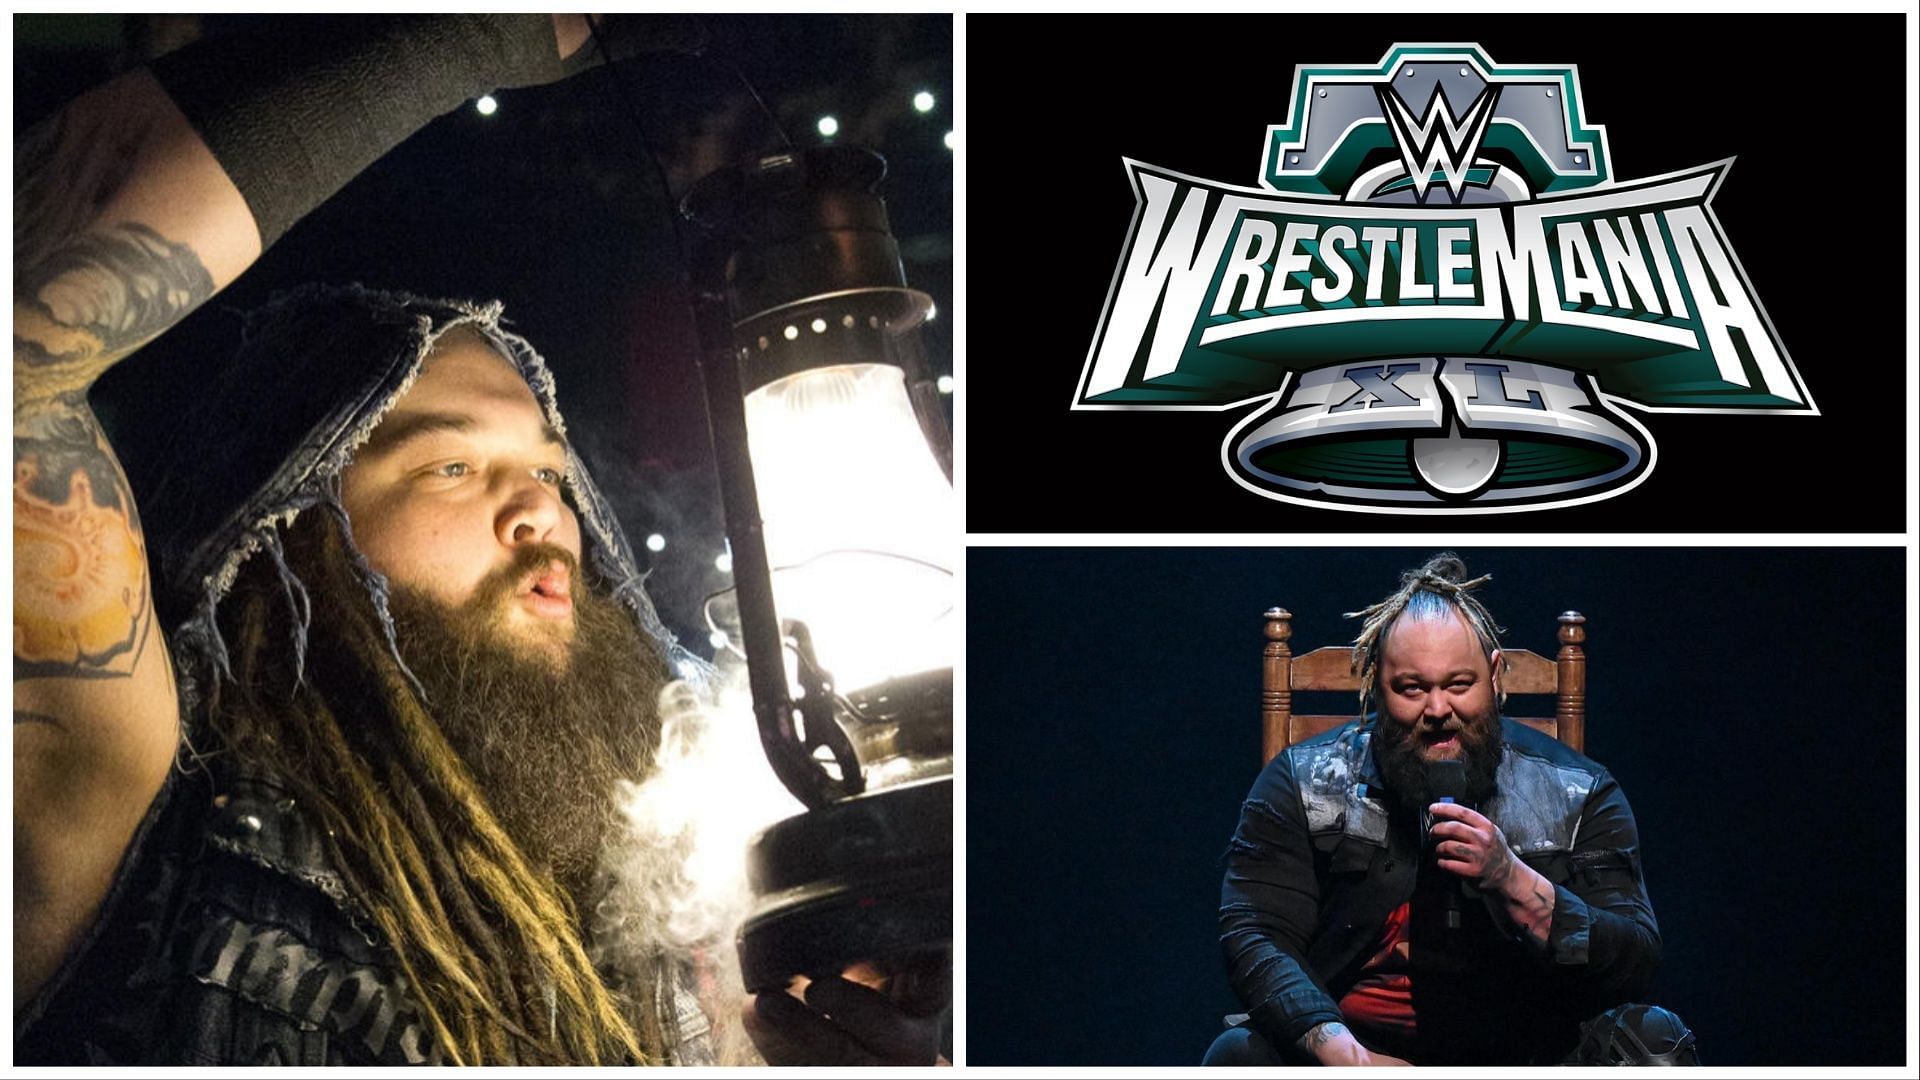 What role will Bray Wyatt play at WWE WrestleMania 40?